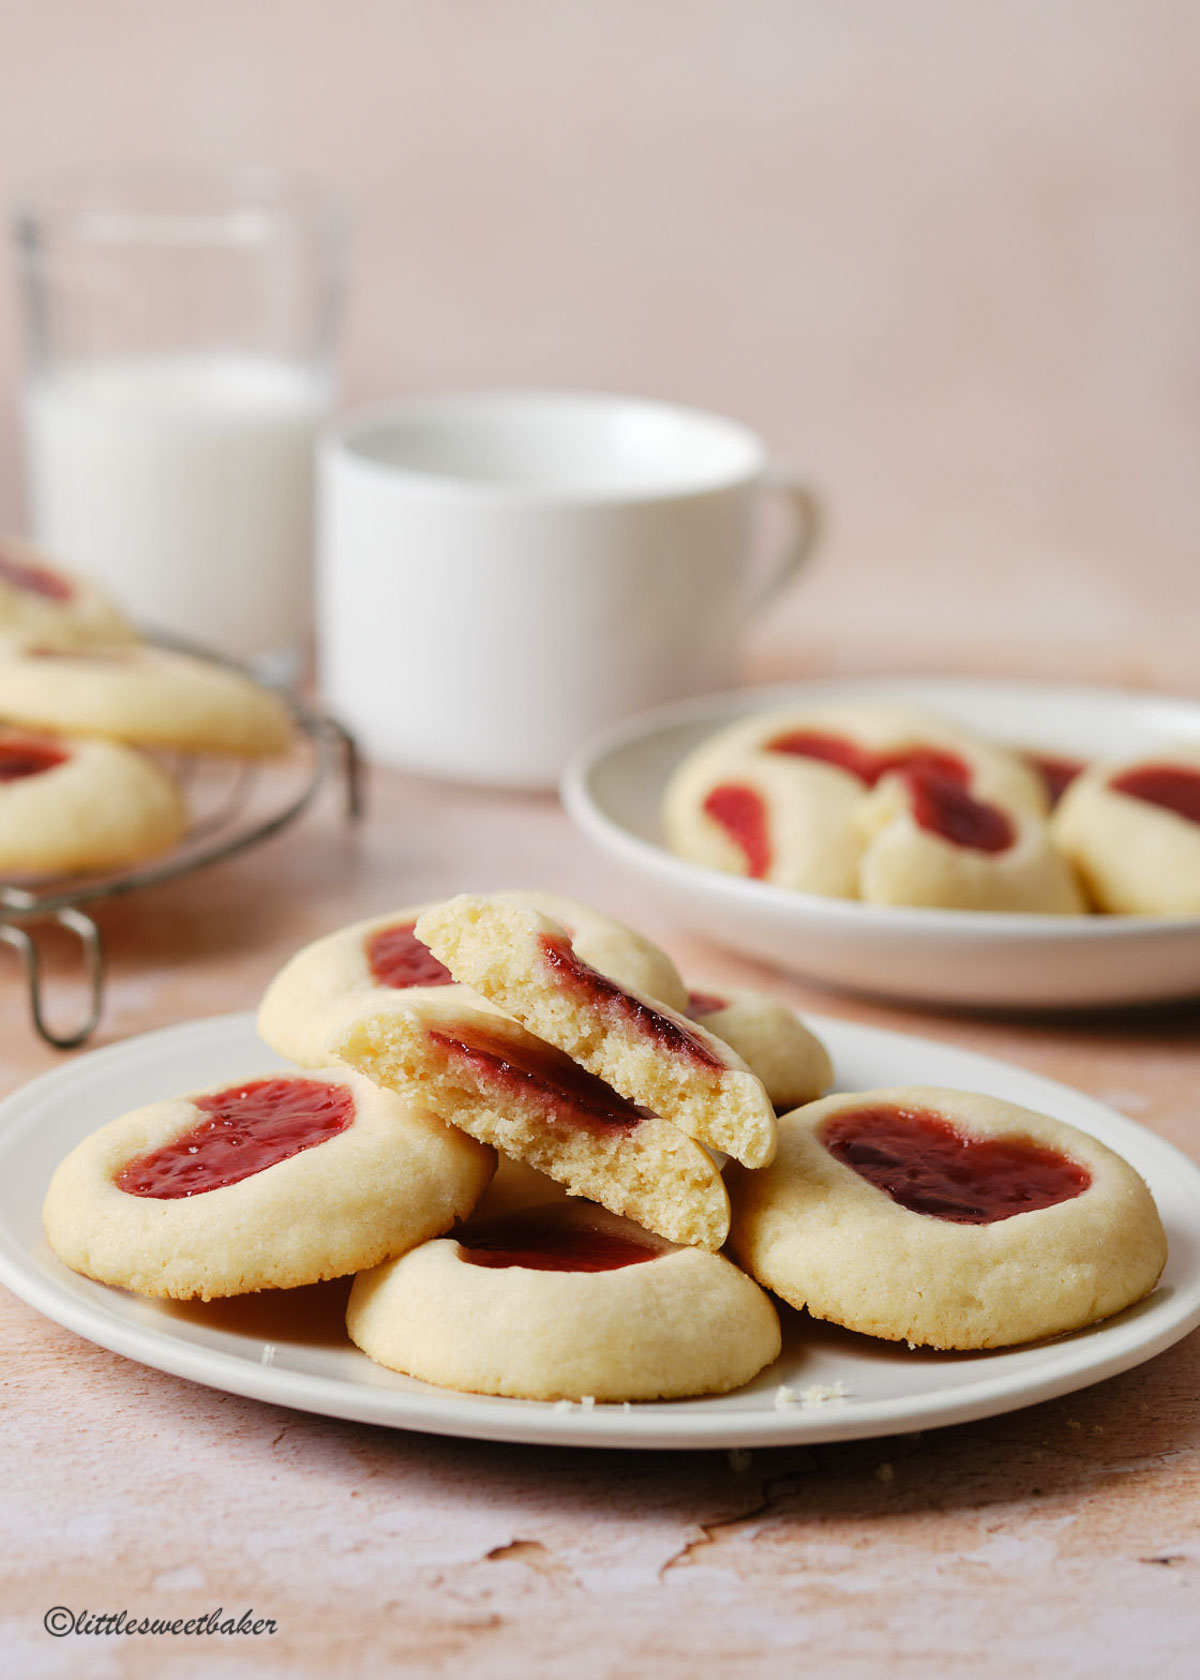 strawberry thumbprint cookies on a plate with one broken in half